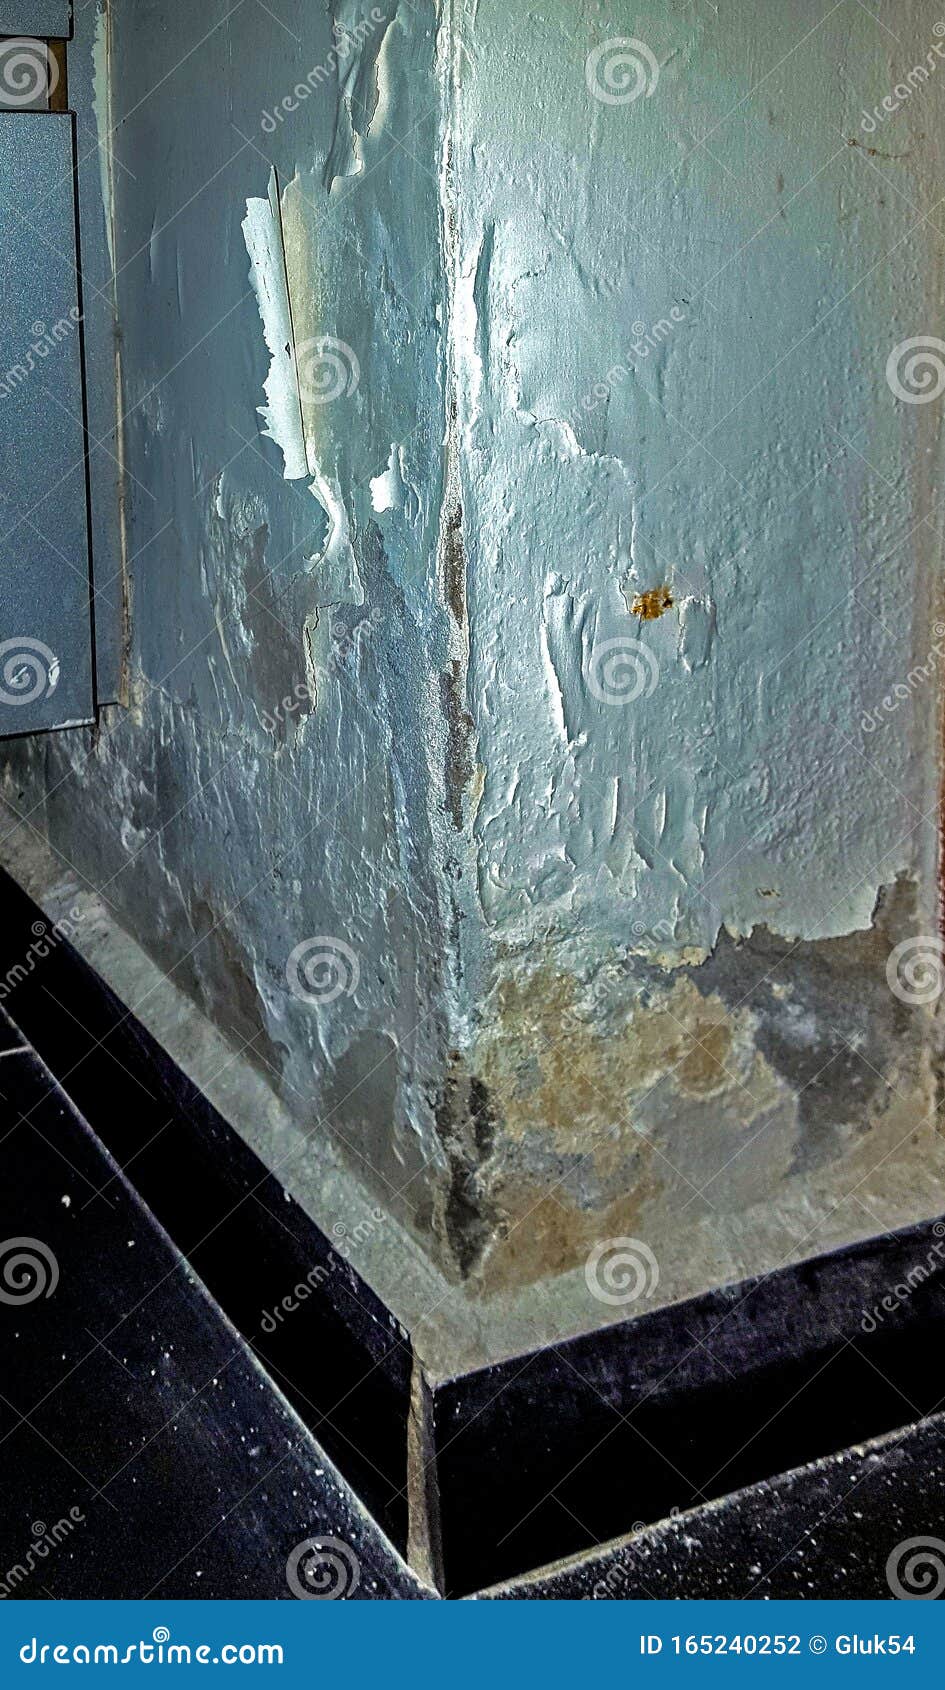 Decorative Wall Covering Damaged By Water Leakage From The Water Supply And Sewage Systems Stock Photo Image Of Coating Background 165240252